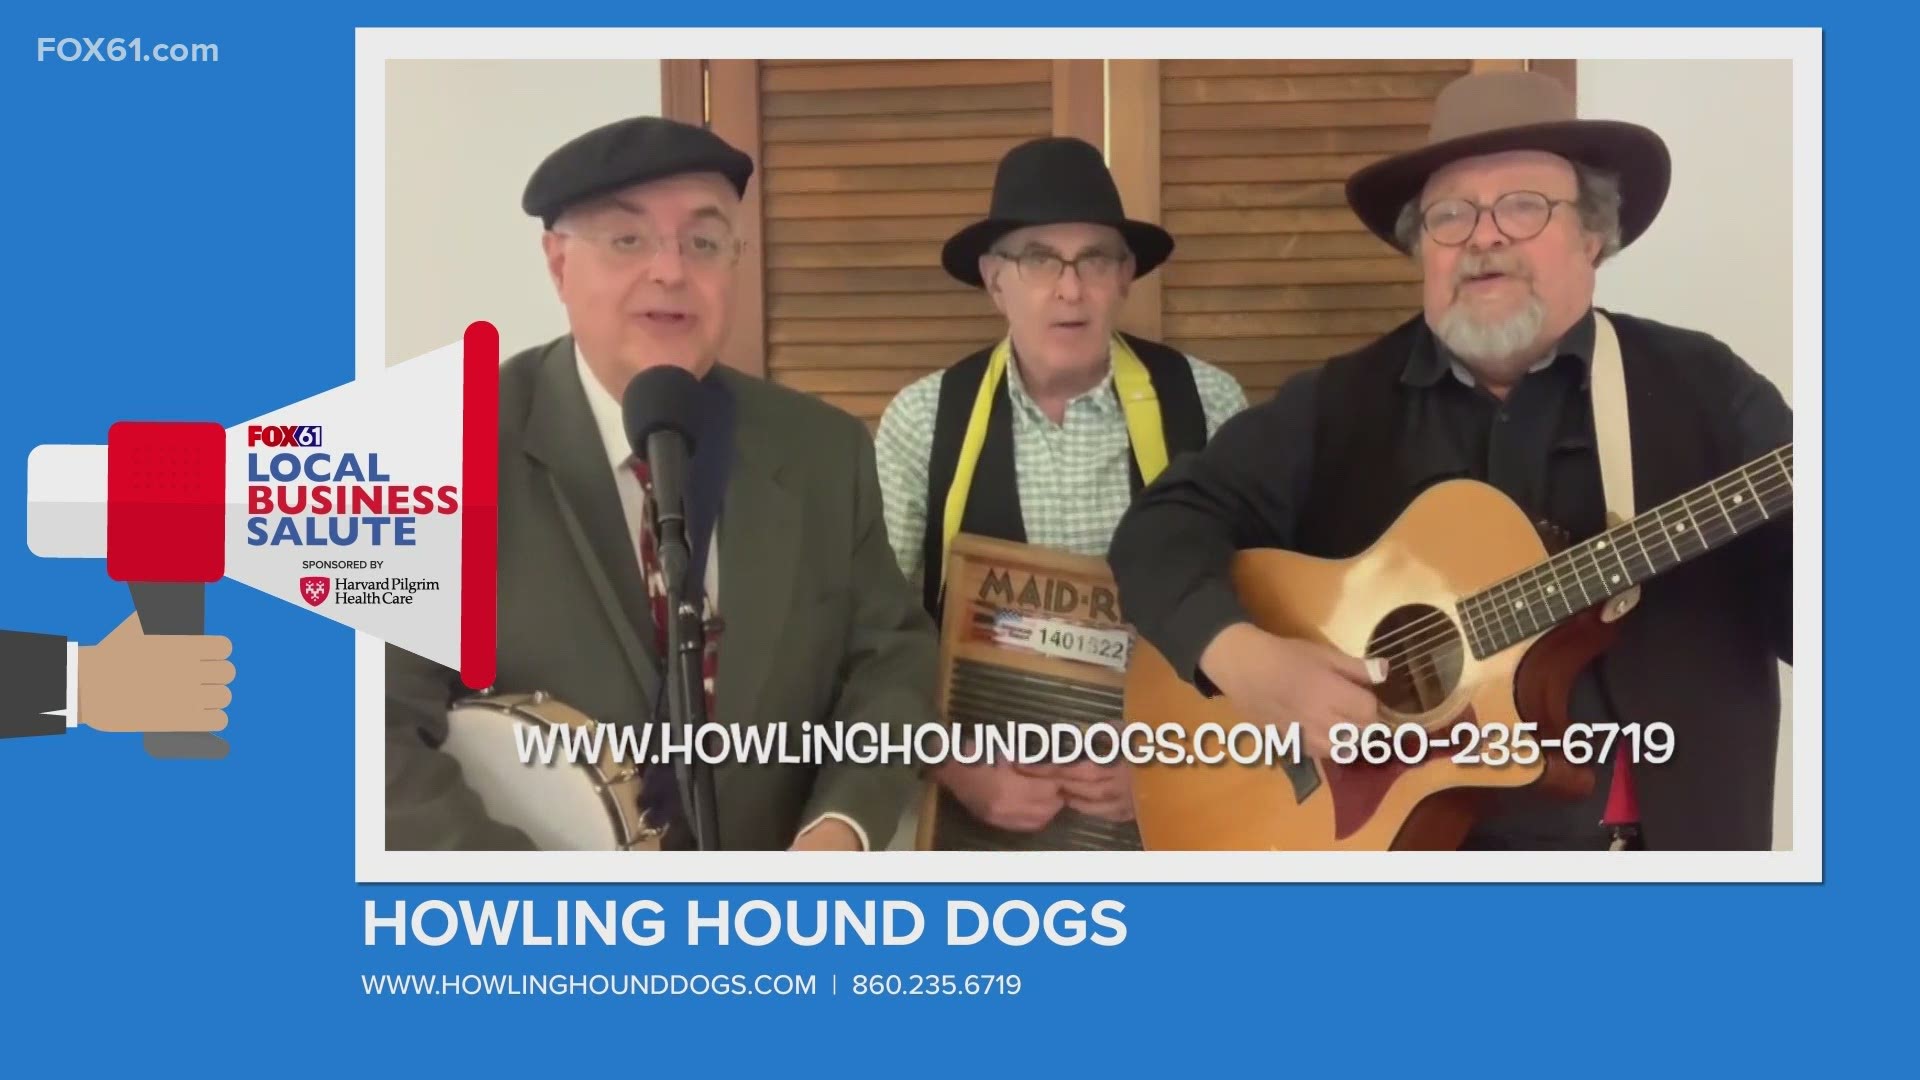 The Howling Hound Dogs describes themselves as an upbeat washboard band that gets audiences howling with fun and laughter